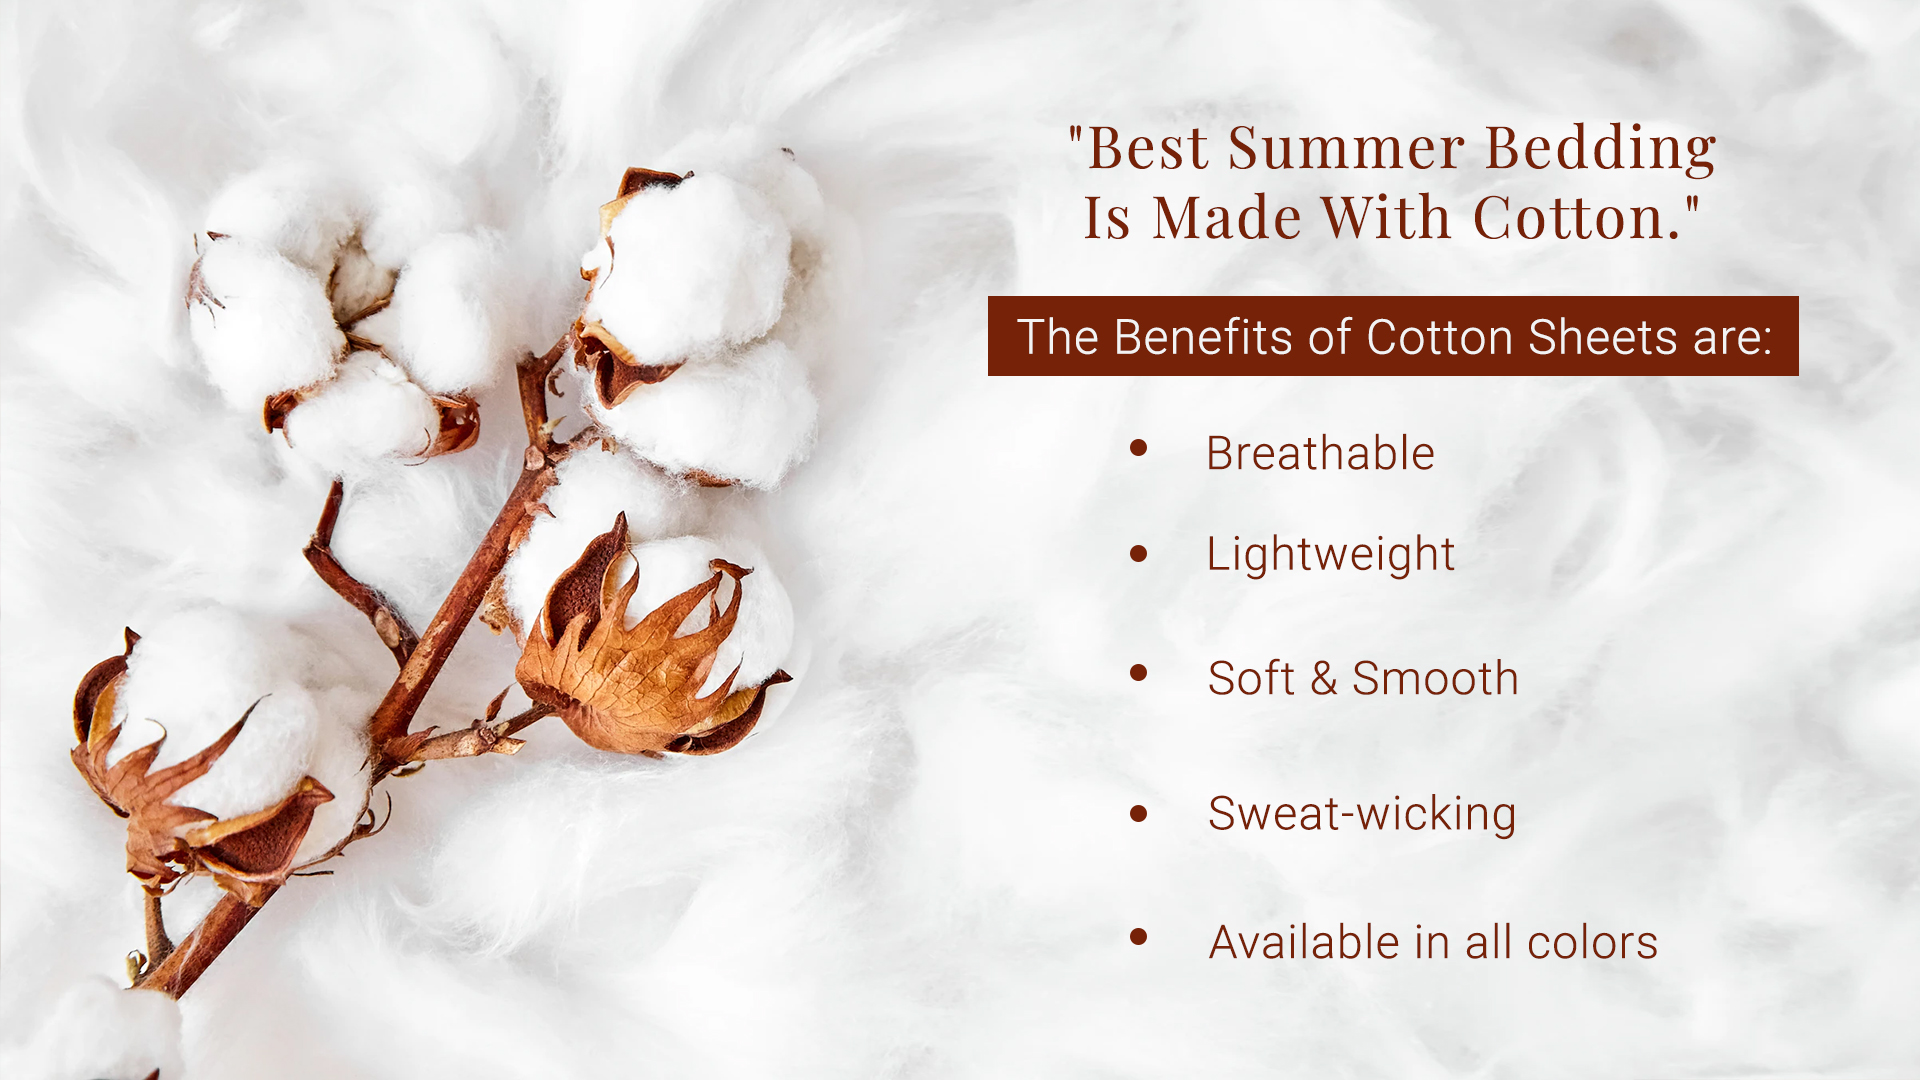 The benefits of cotton sheets